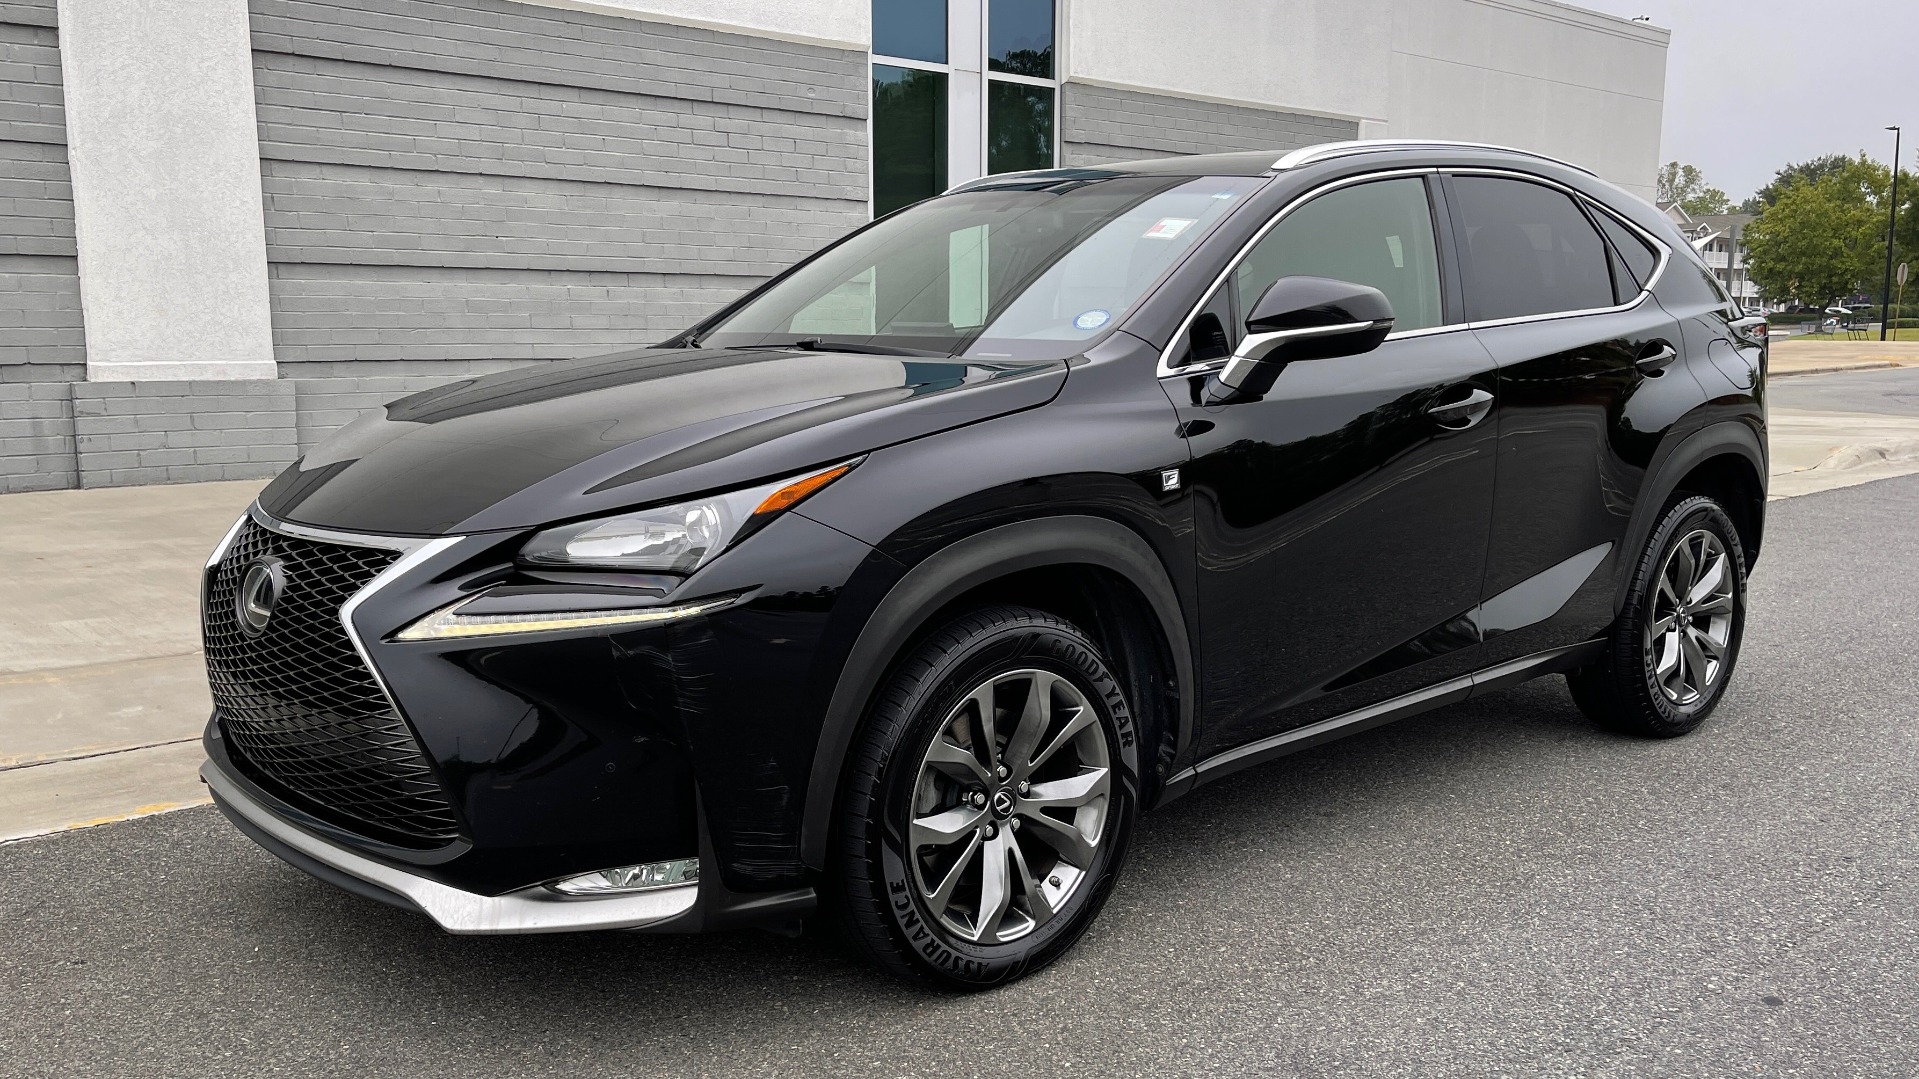 Used 2017 Lexus NX PREMIUM F-SPORT / 2.0L TURBO / BSM / PARK ASST / REARVIEW for sale Sold at Formula Imports in Charlotte NC 28227 3